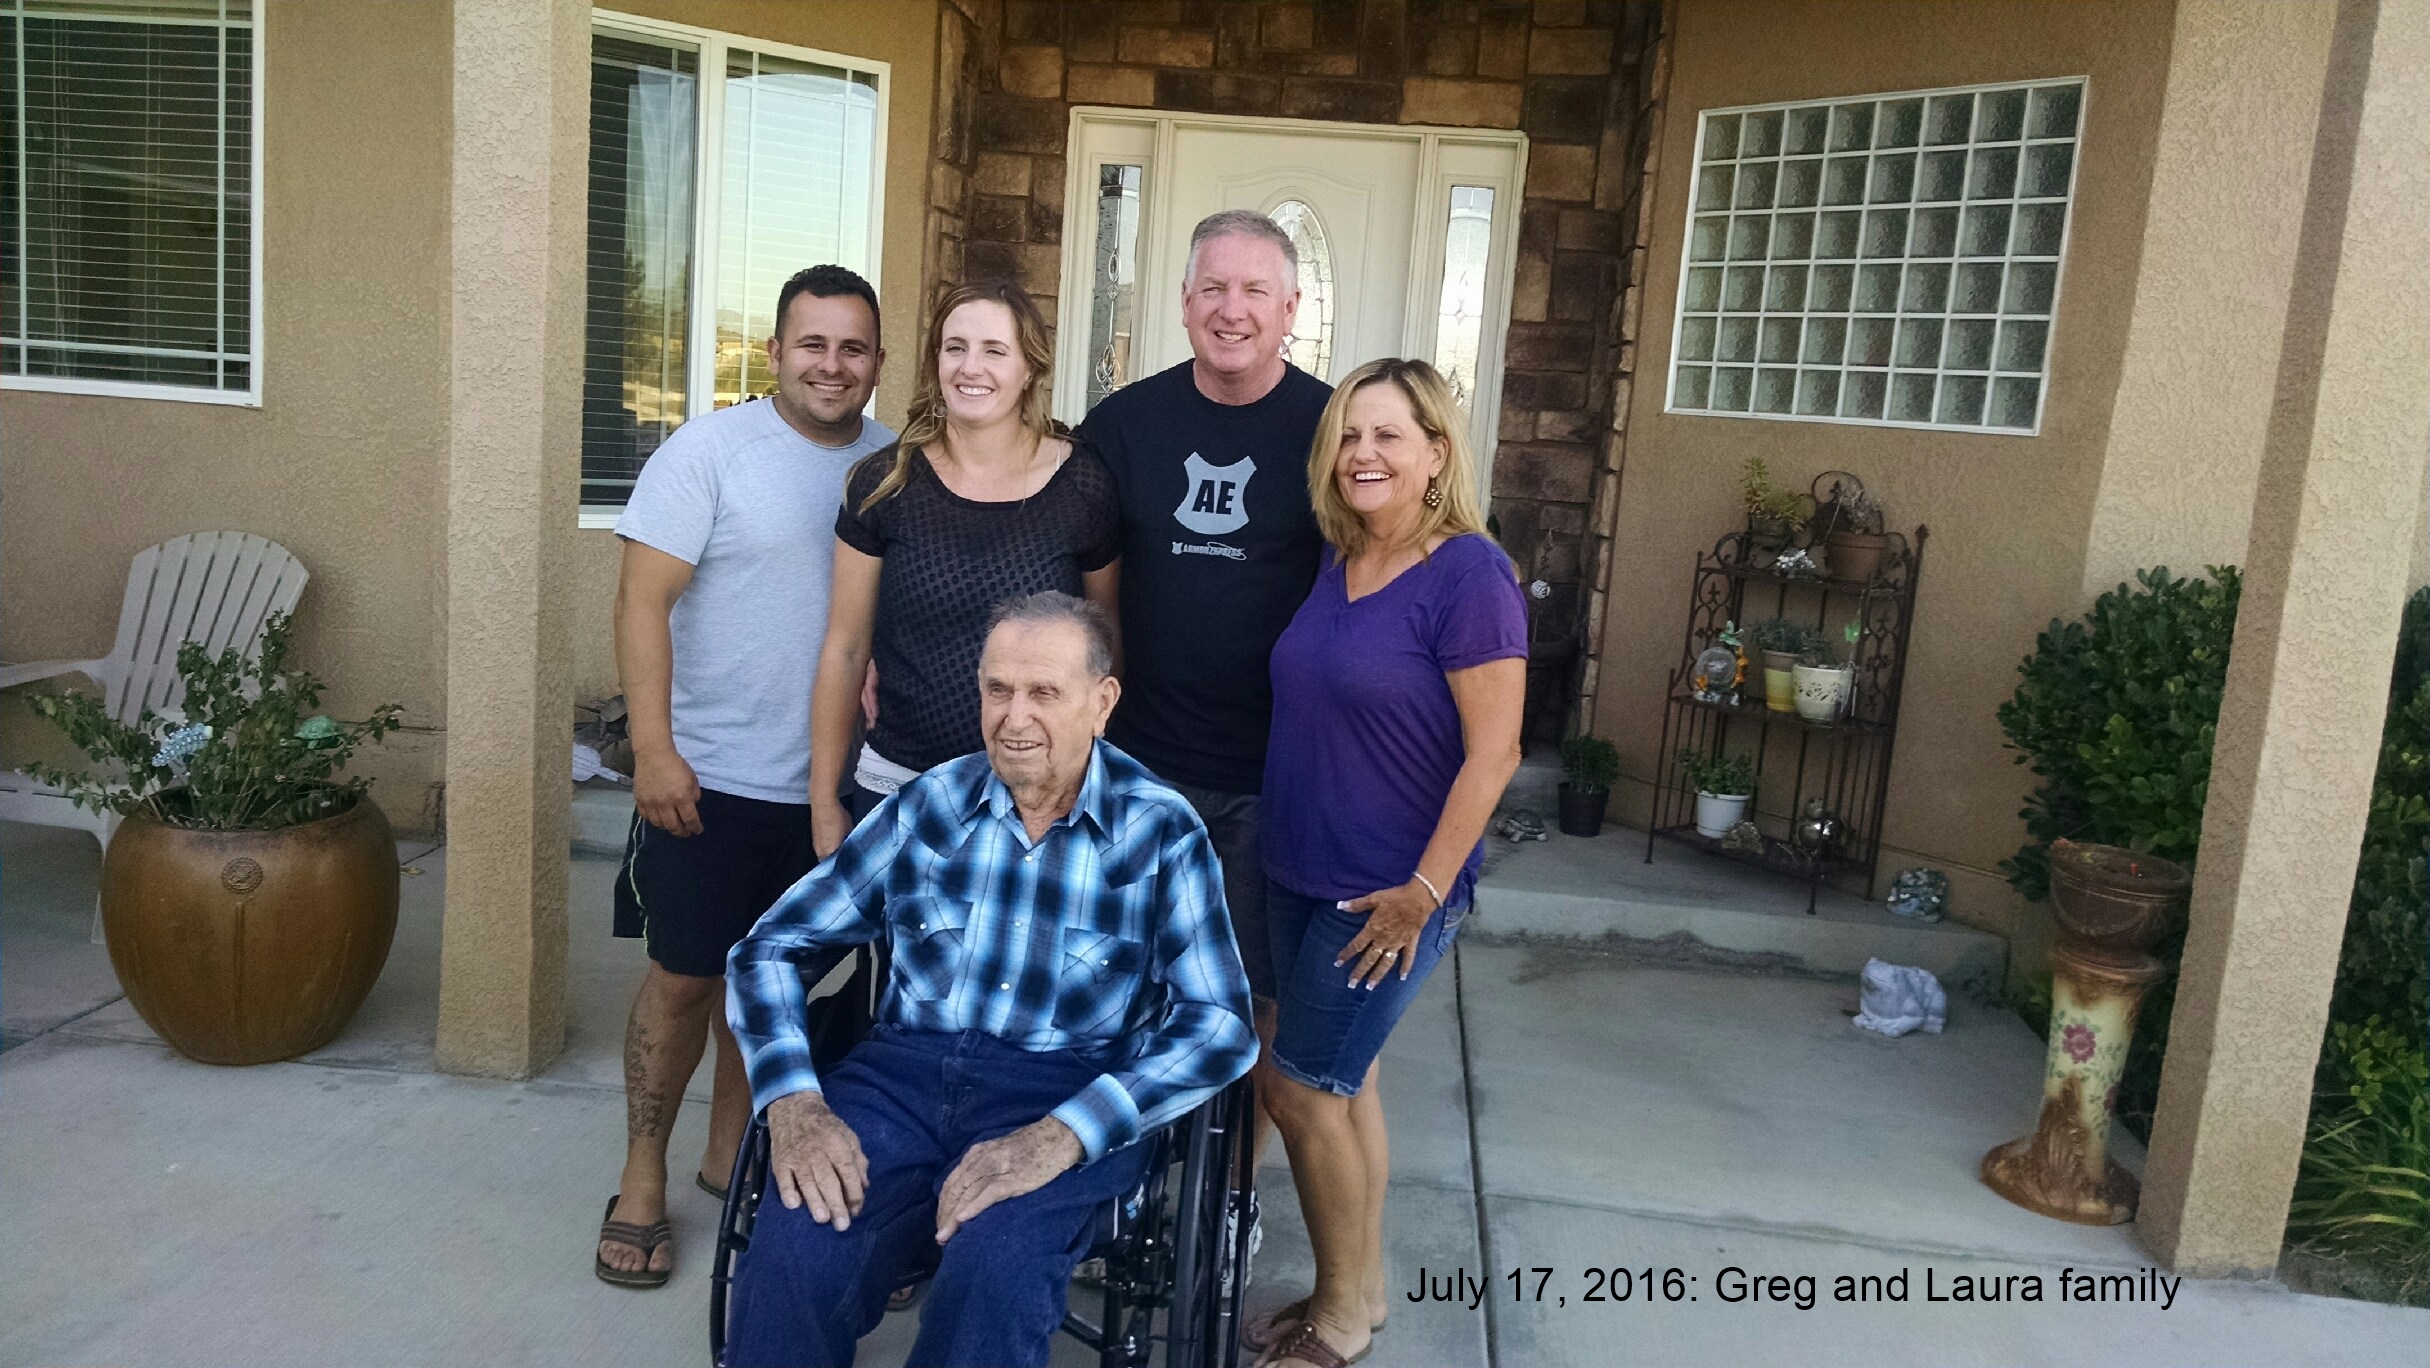 Gregg, Laura, Shawna and husband.  Branden is missing from photo, July 17, 2016.